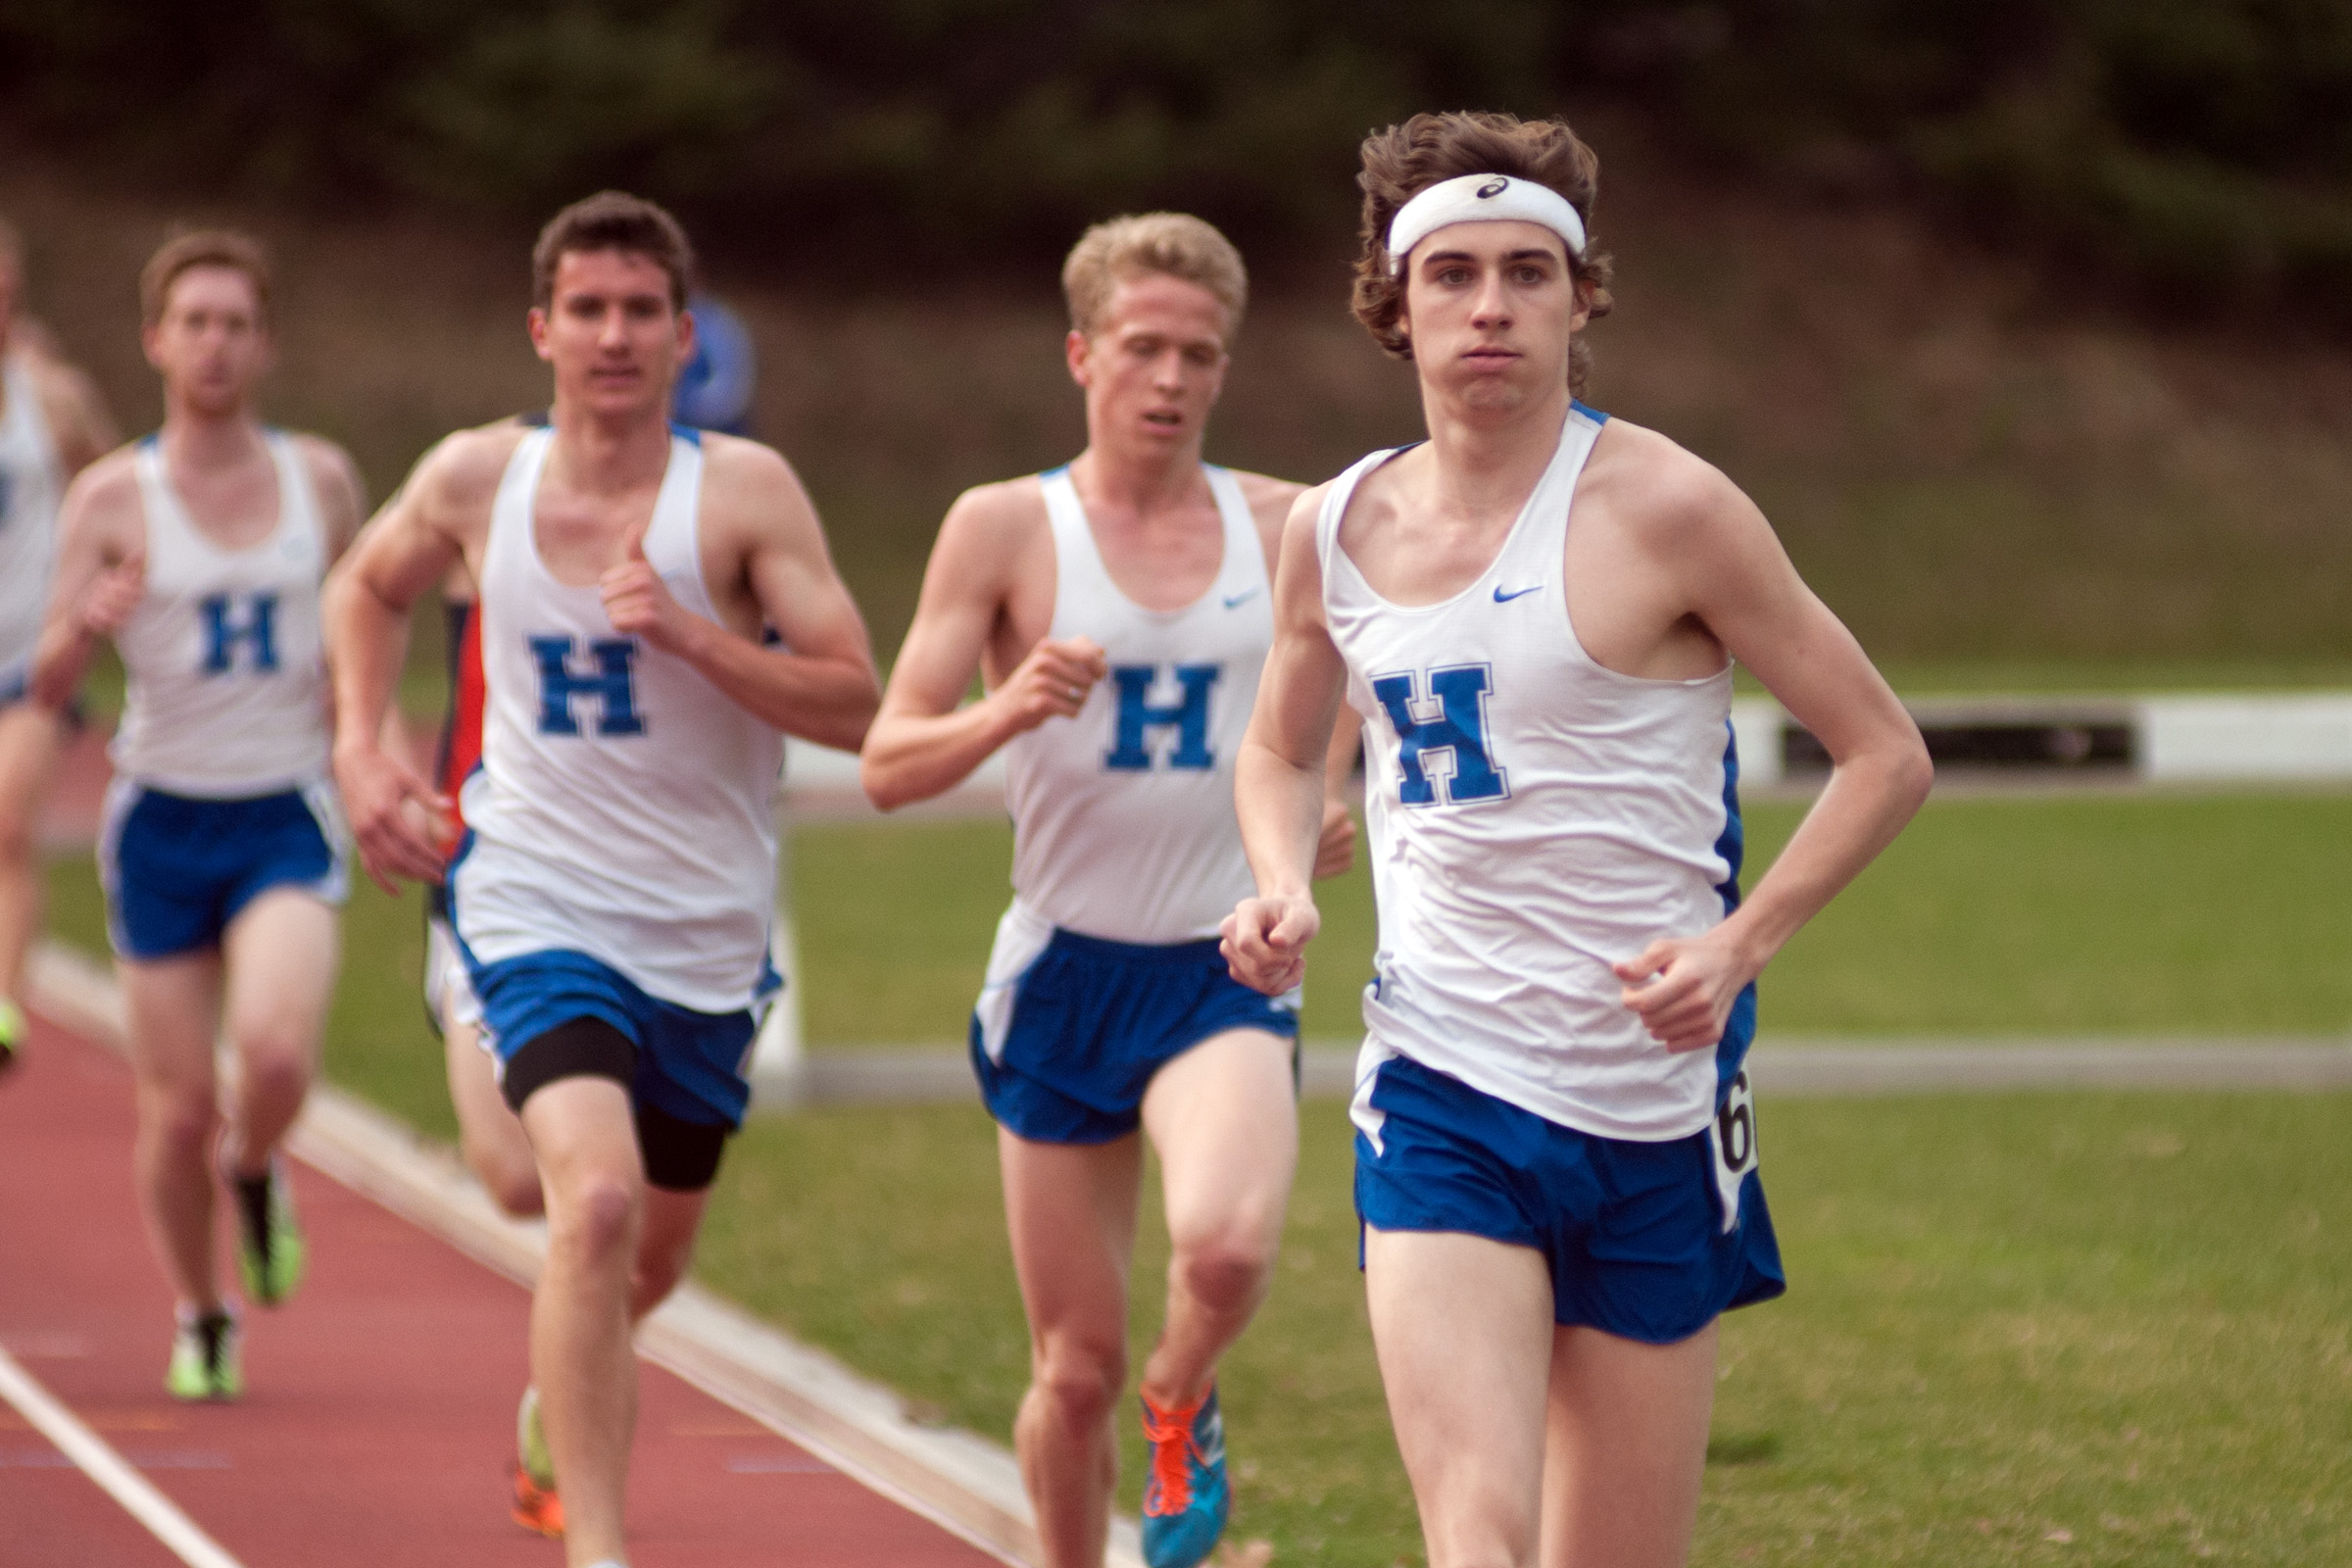 16 top10 efforts at SUNY Geneseo for men's track & field